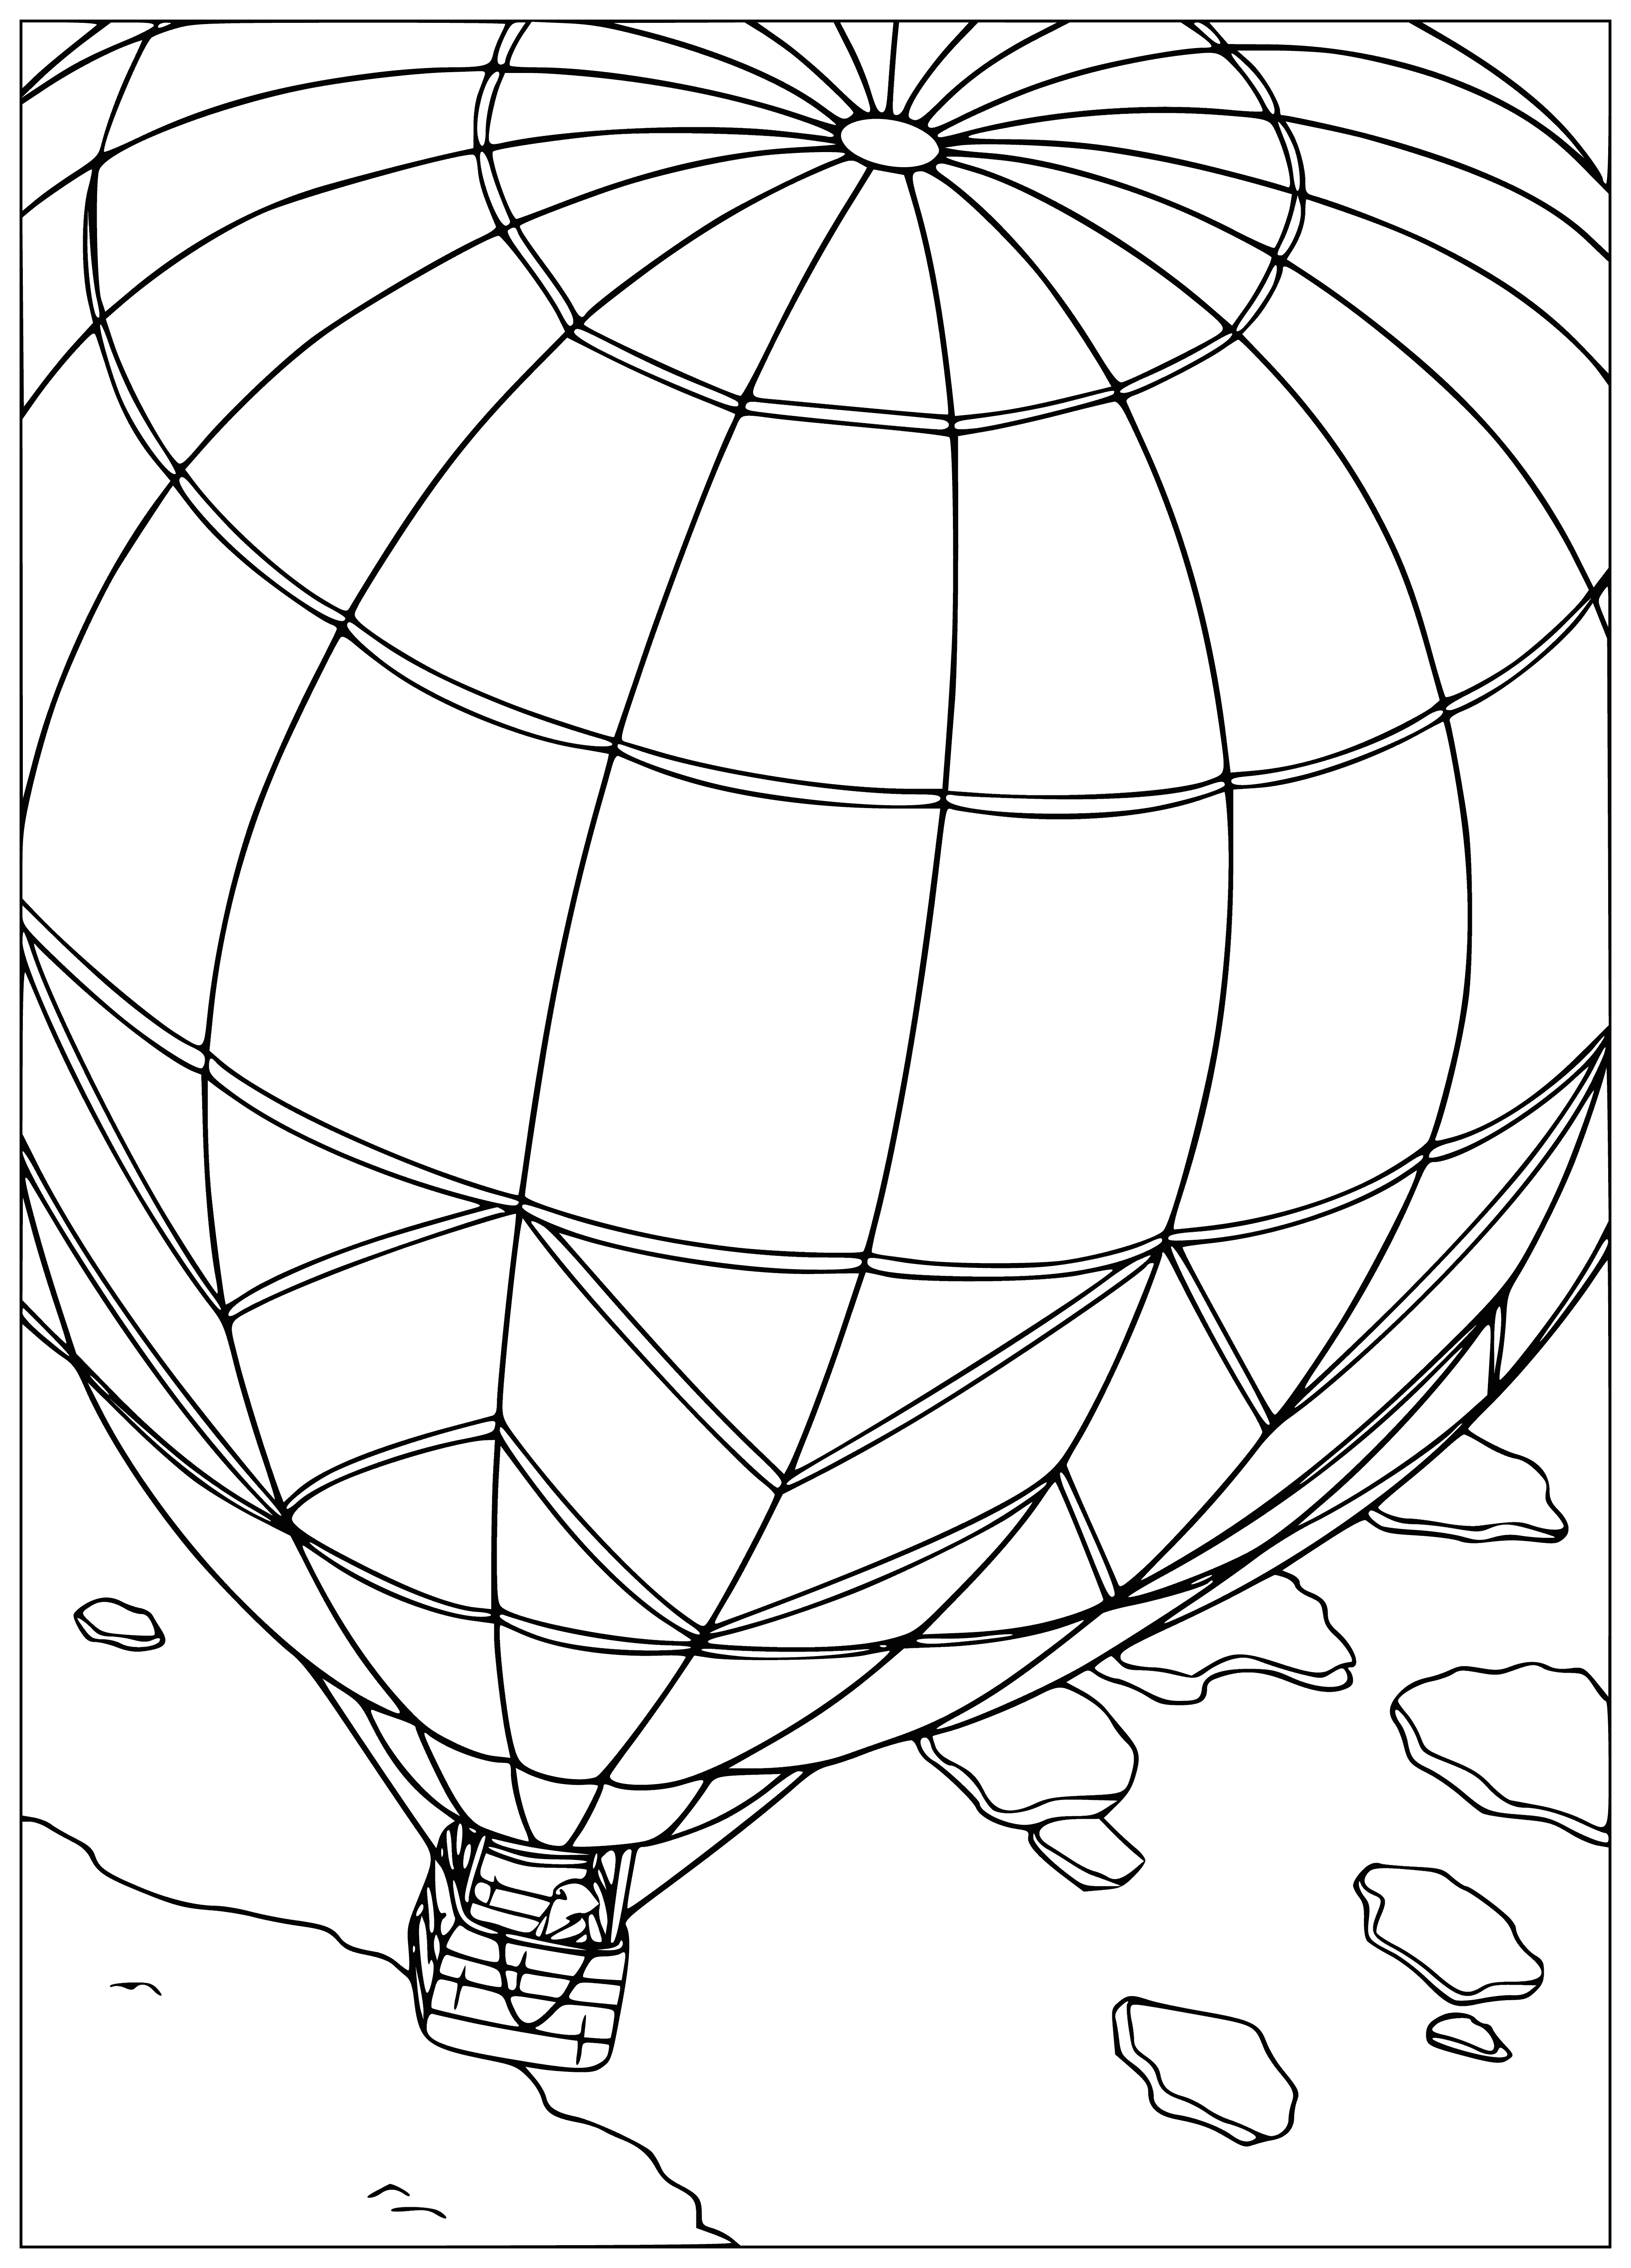 coloring page: Little polar bear playing with ball, white w/ black spots, black eyes and nose, wearing red scarf.